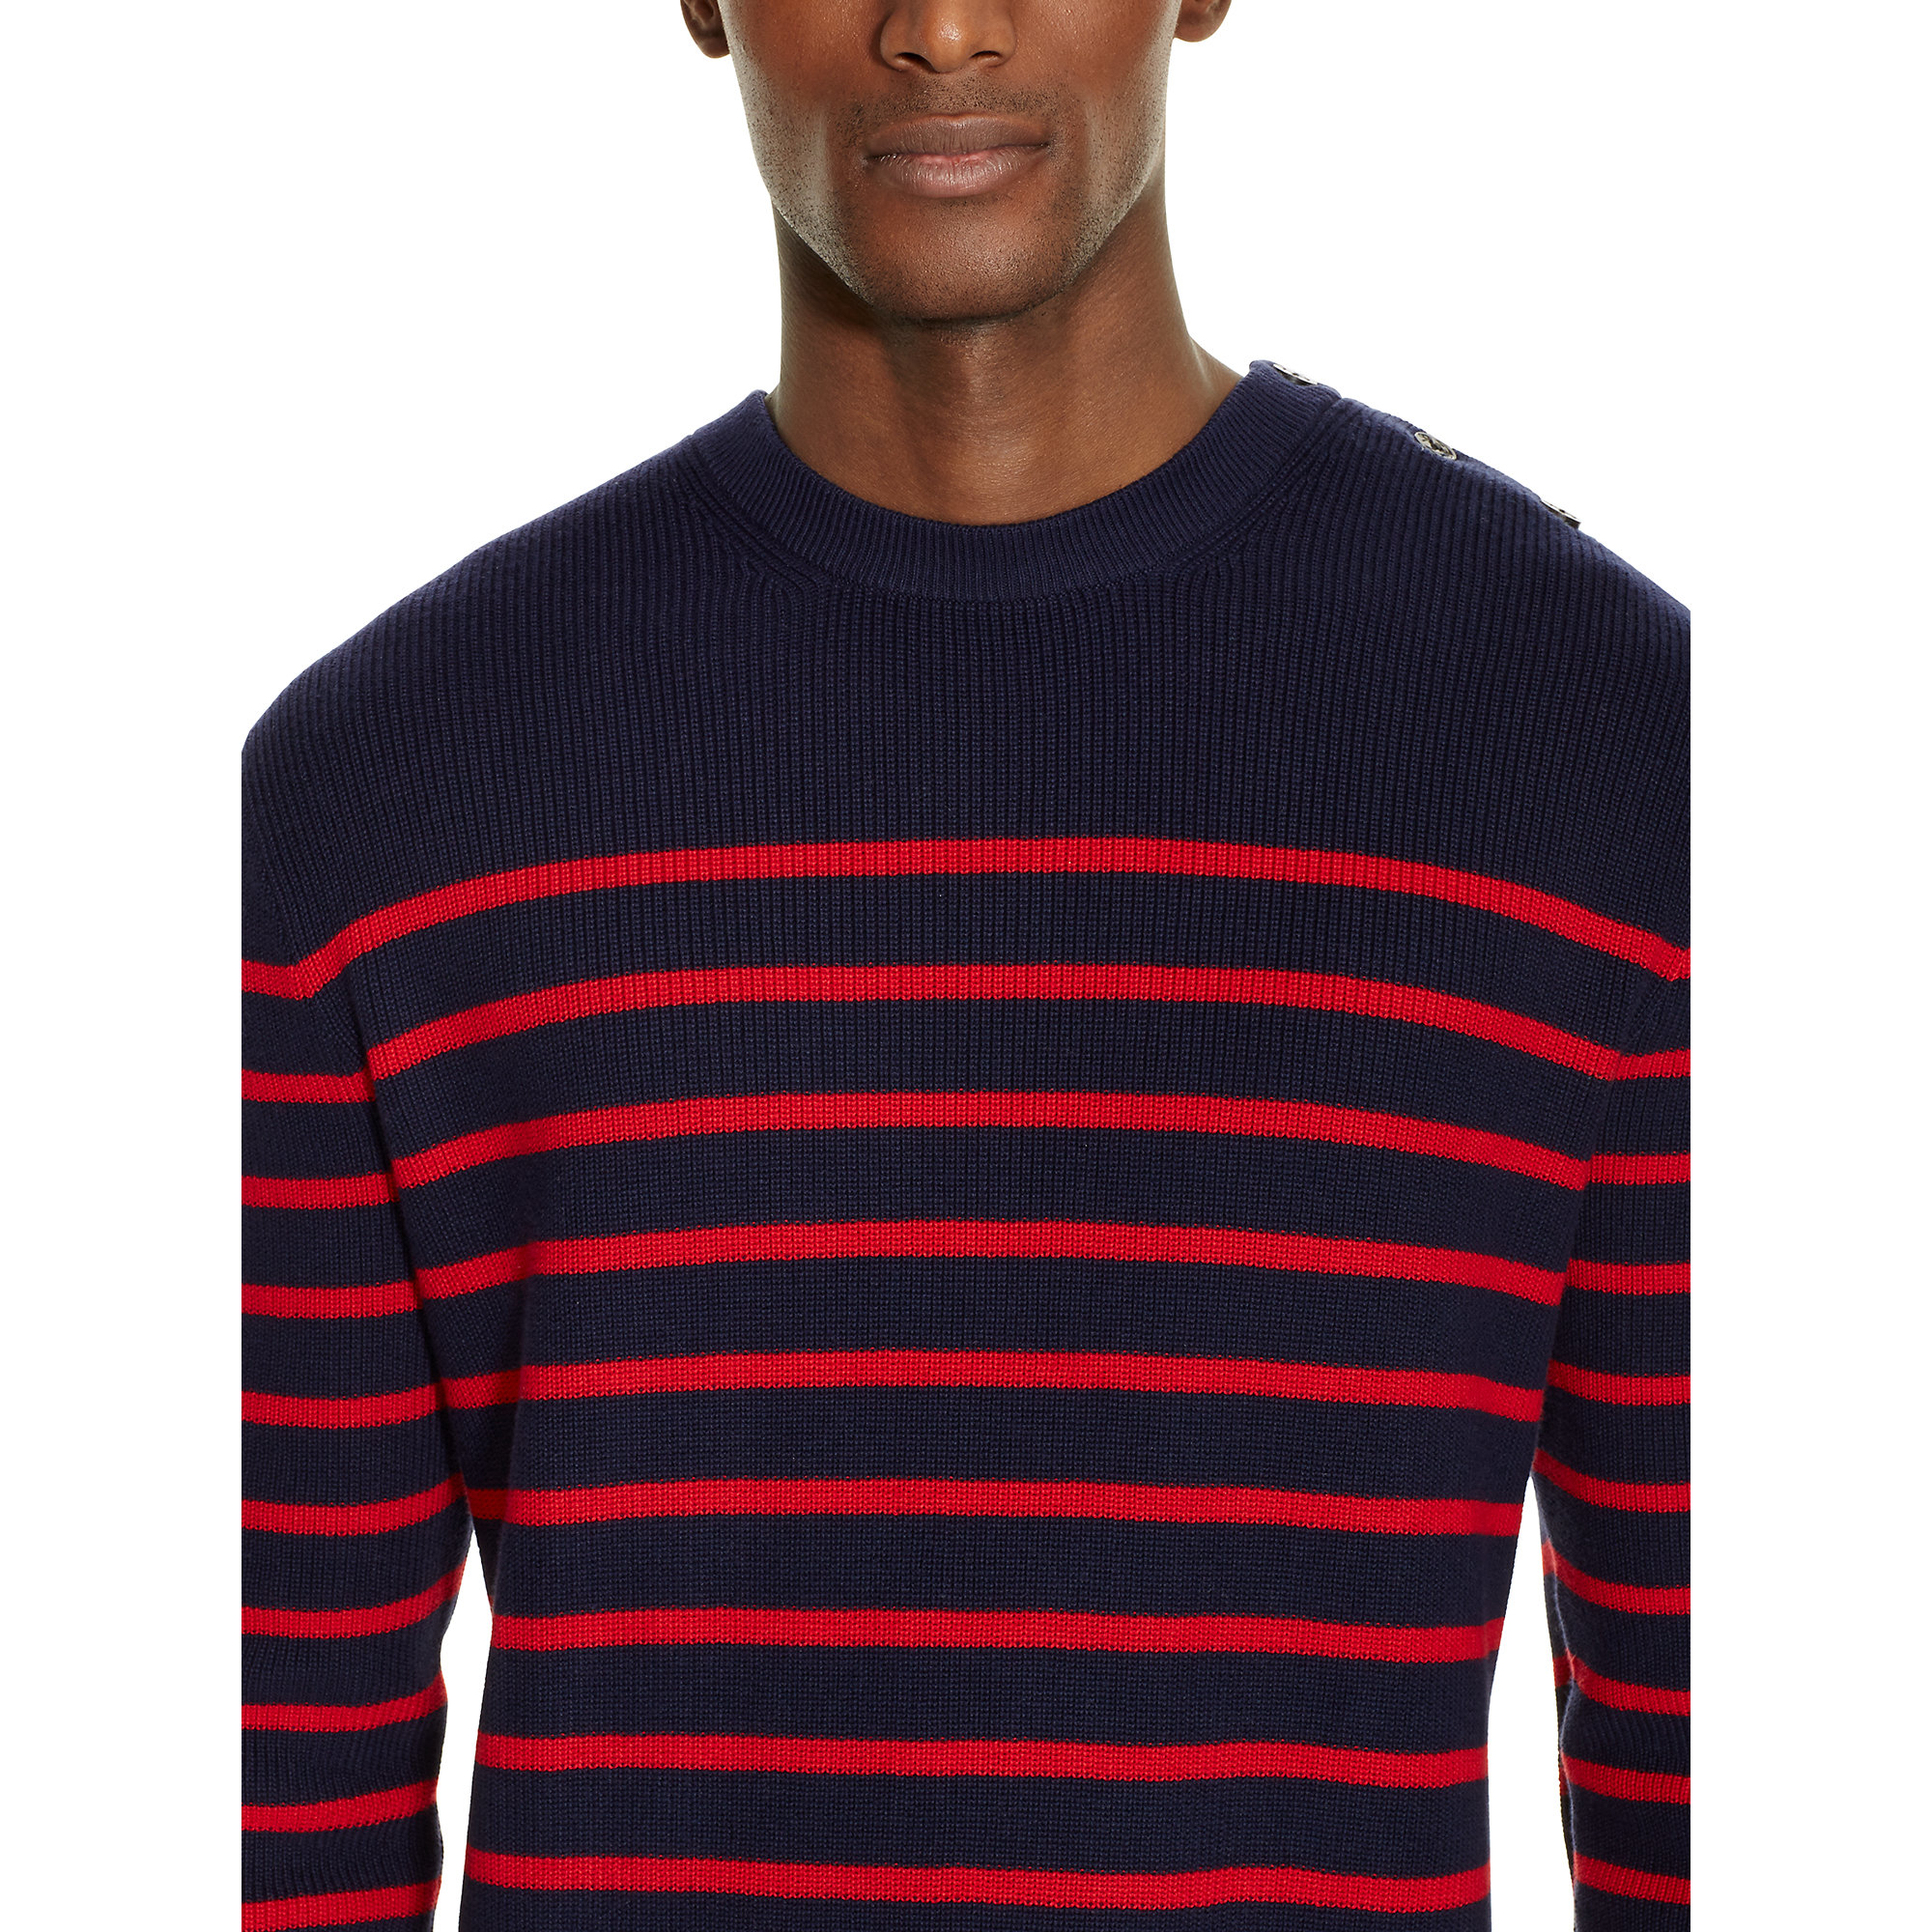 Polo Ralph Lauren Striped Cotton Sweater in Navy w Red (Black) for 